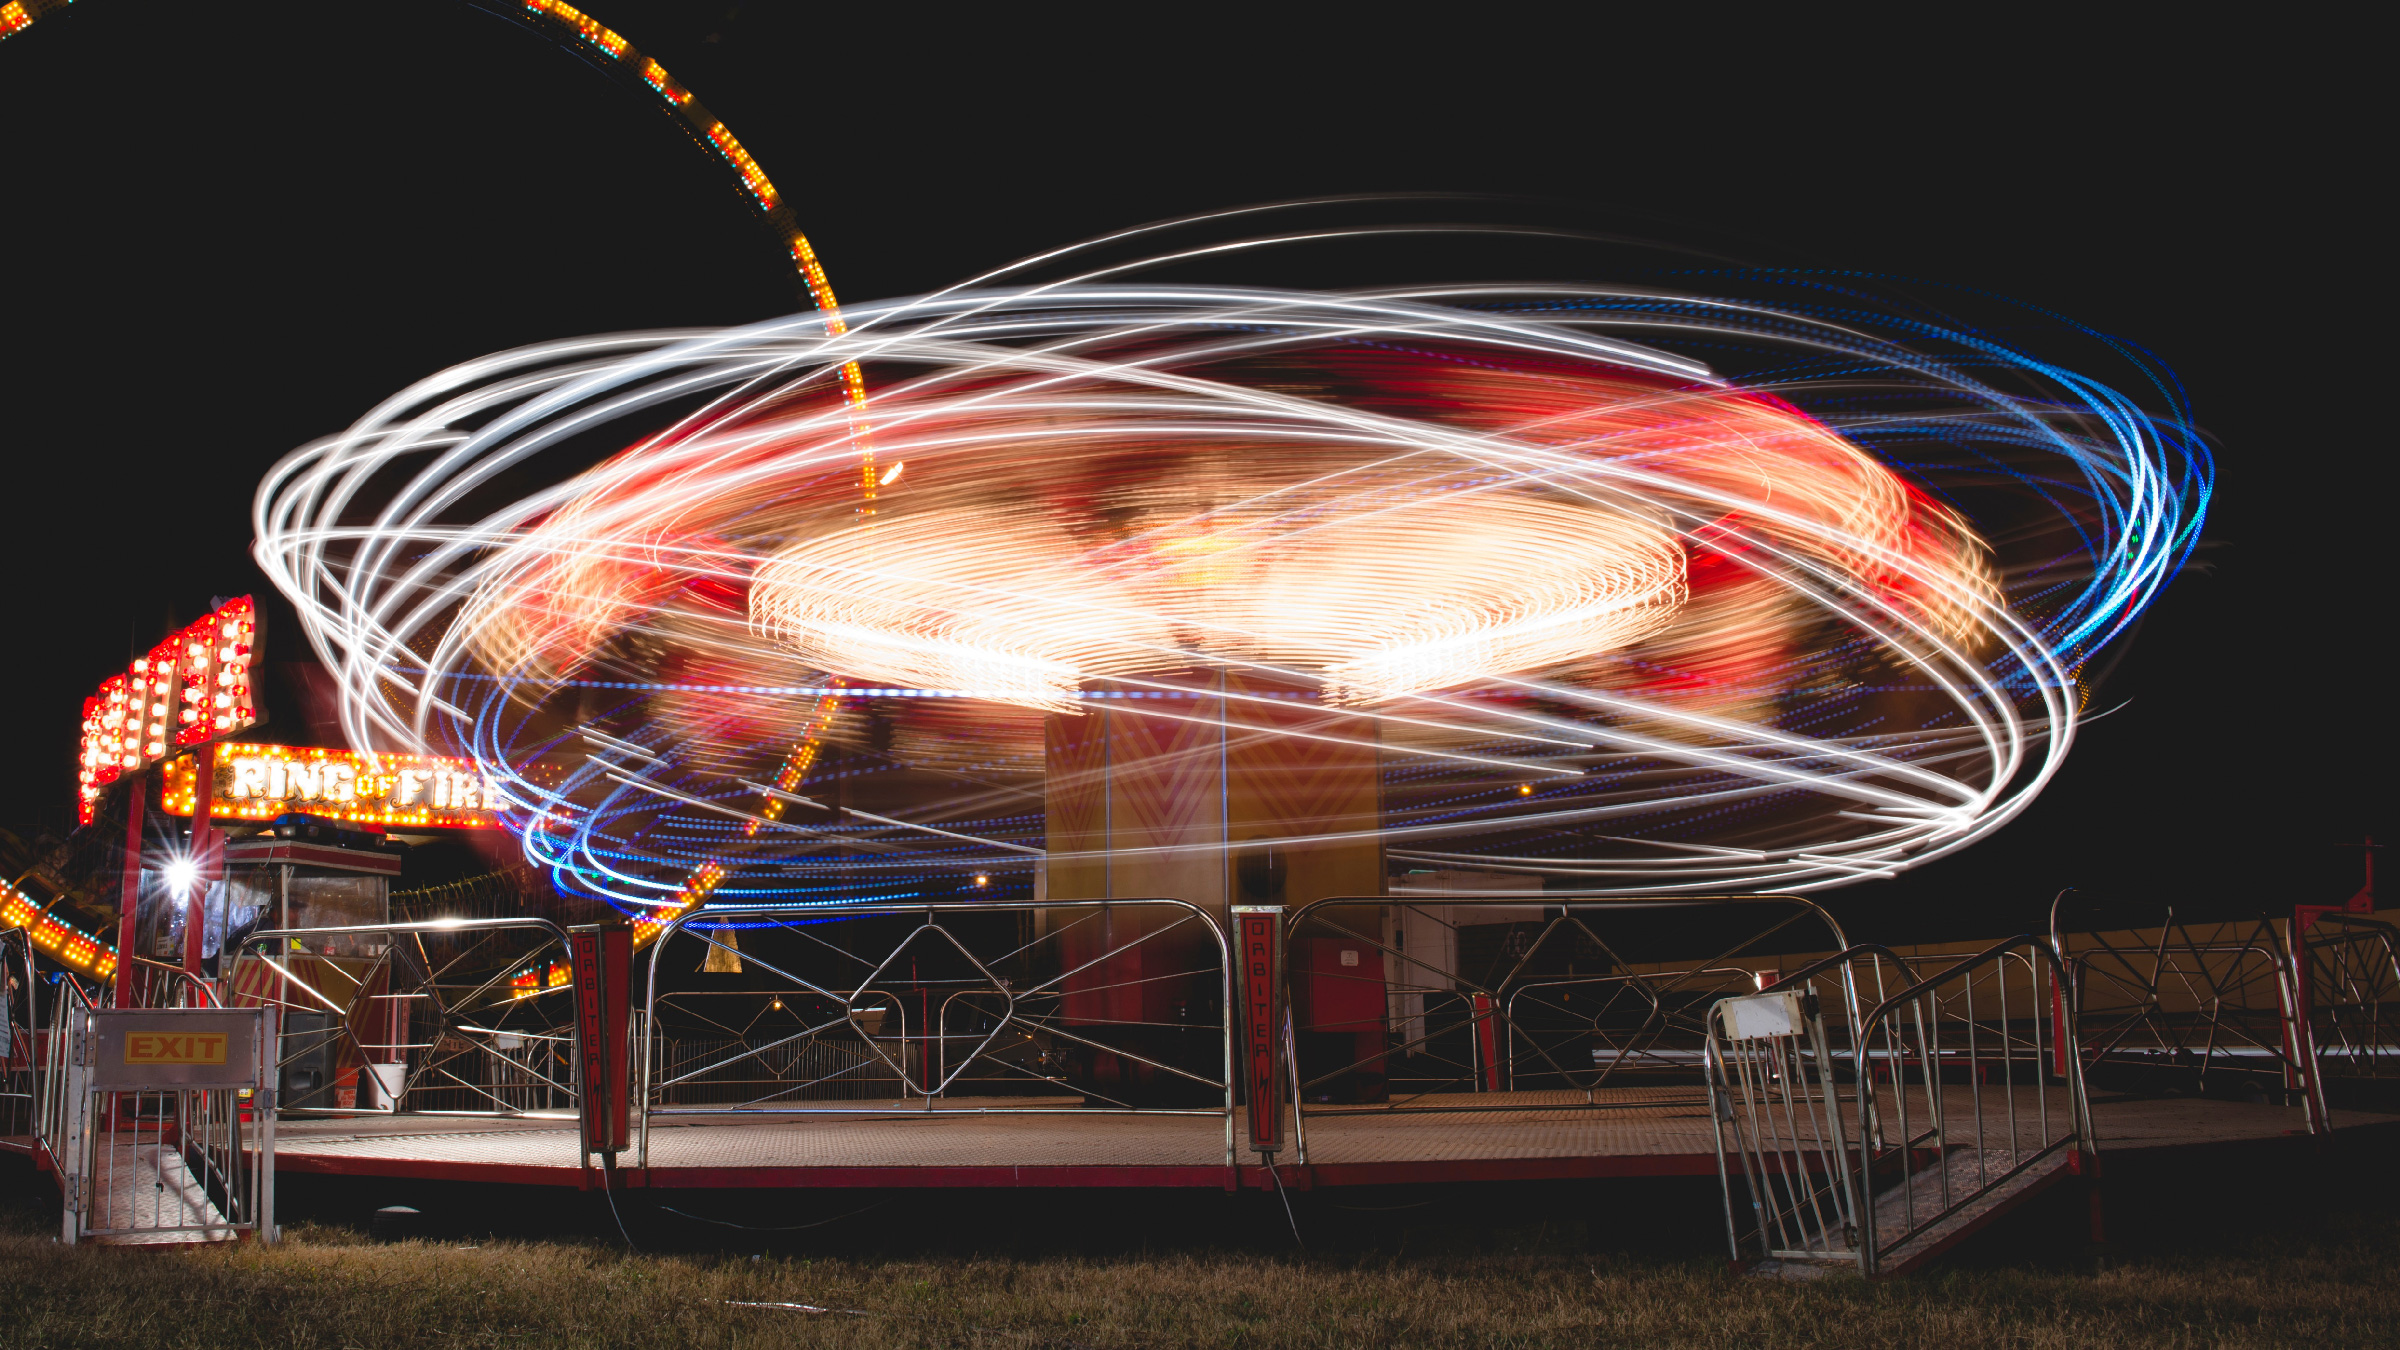 Time lapse of a carnival ride at night